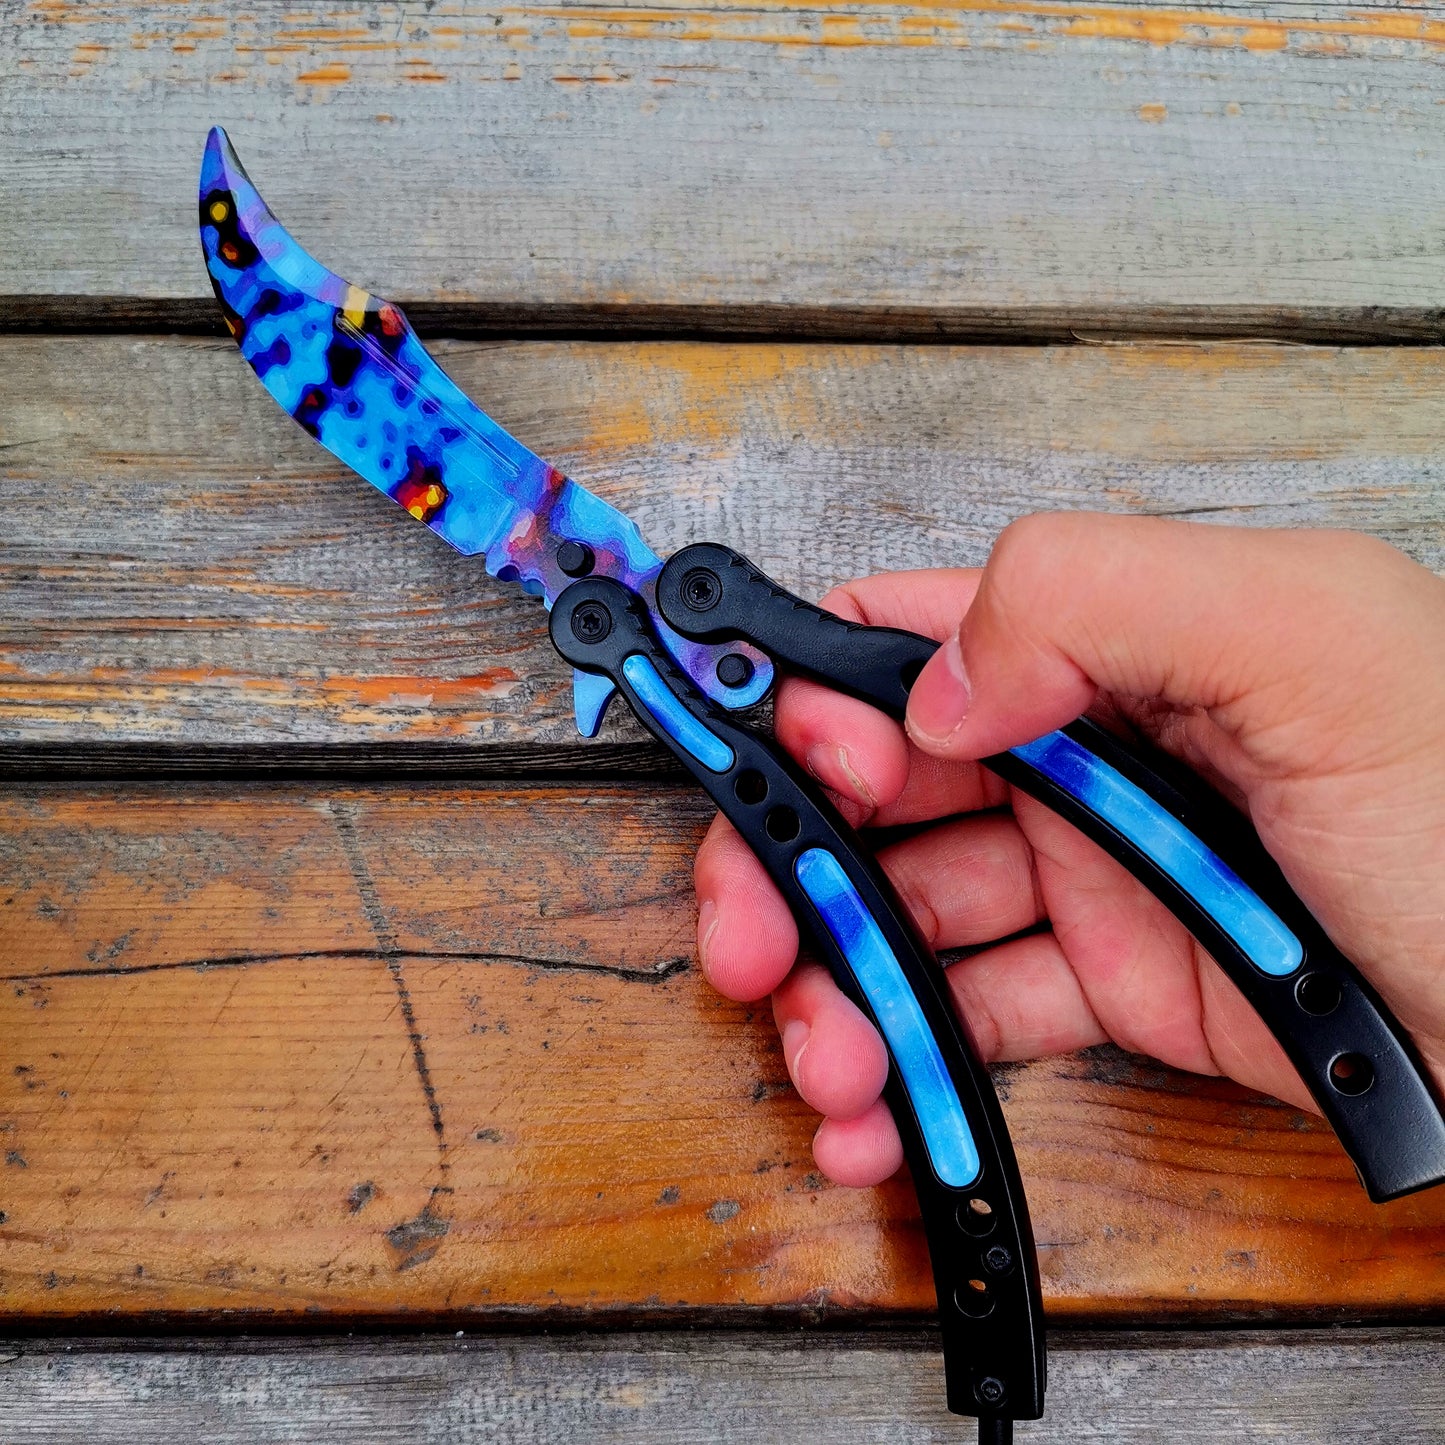 Global Offensive Game Butterfly Knife Blunt Blade Trainer Replica